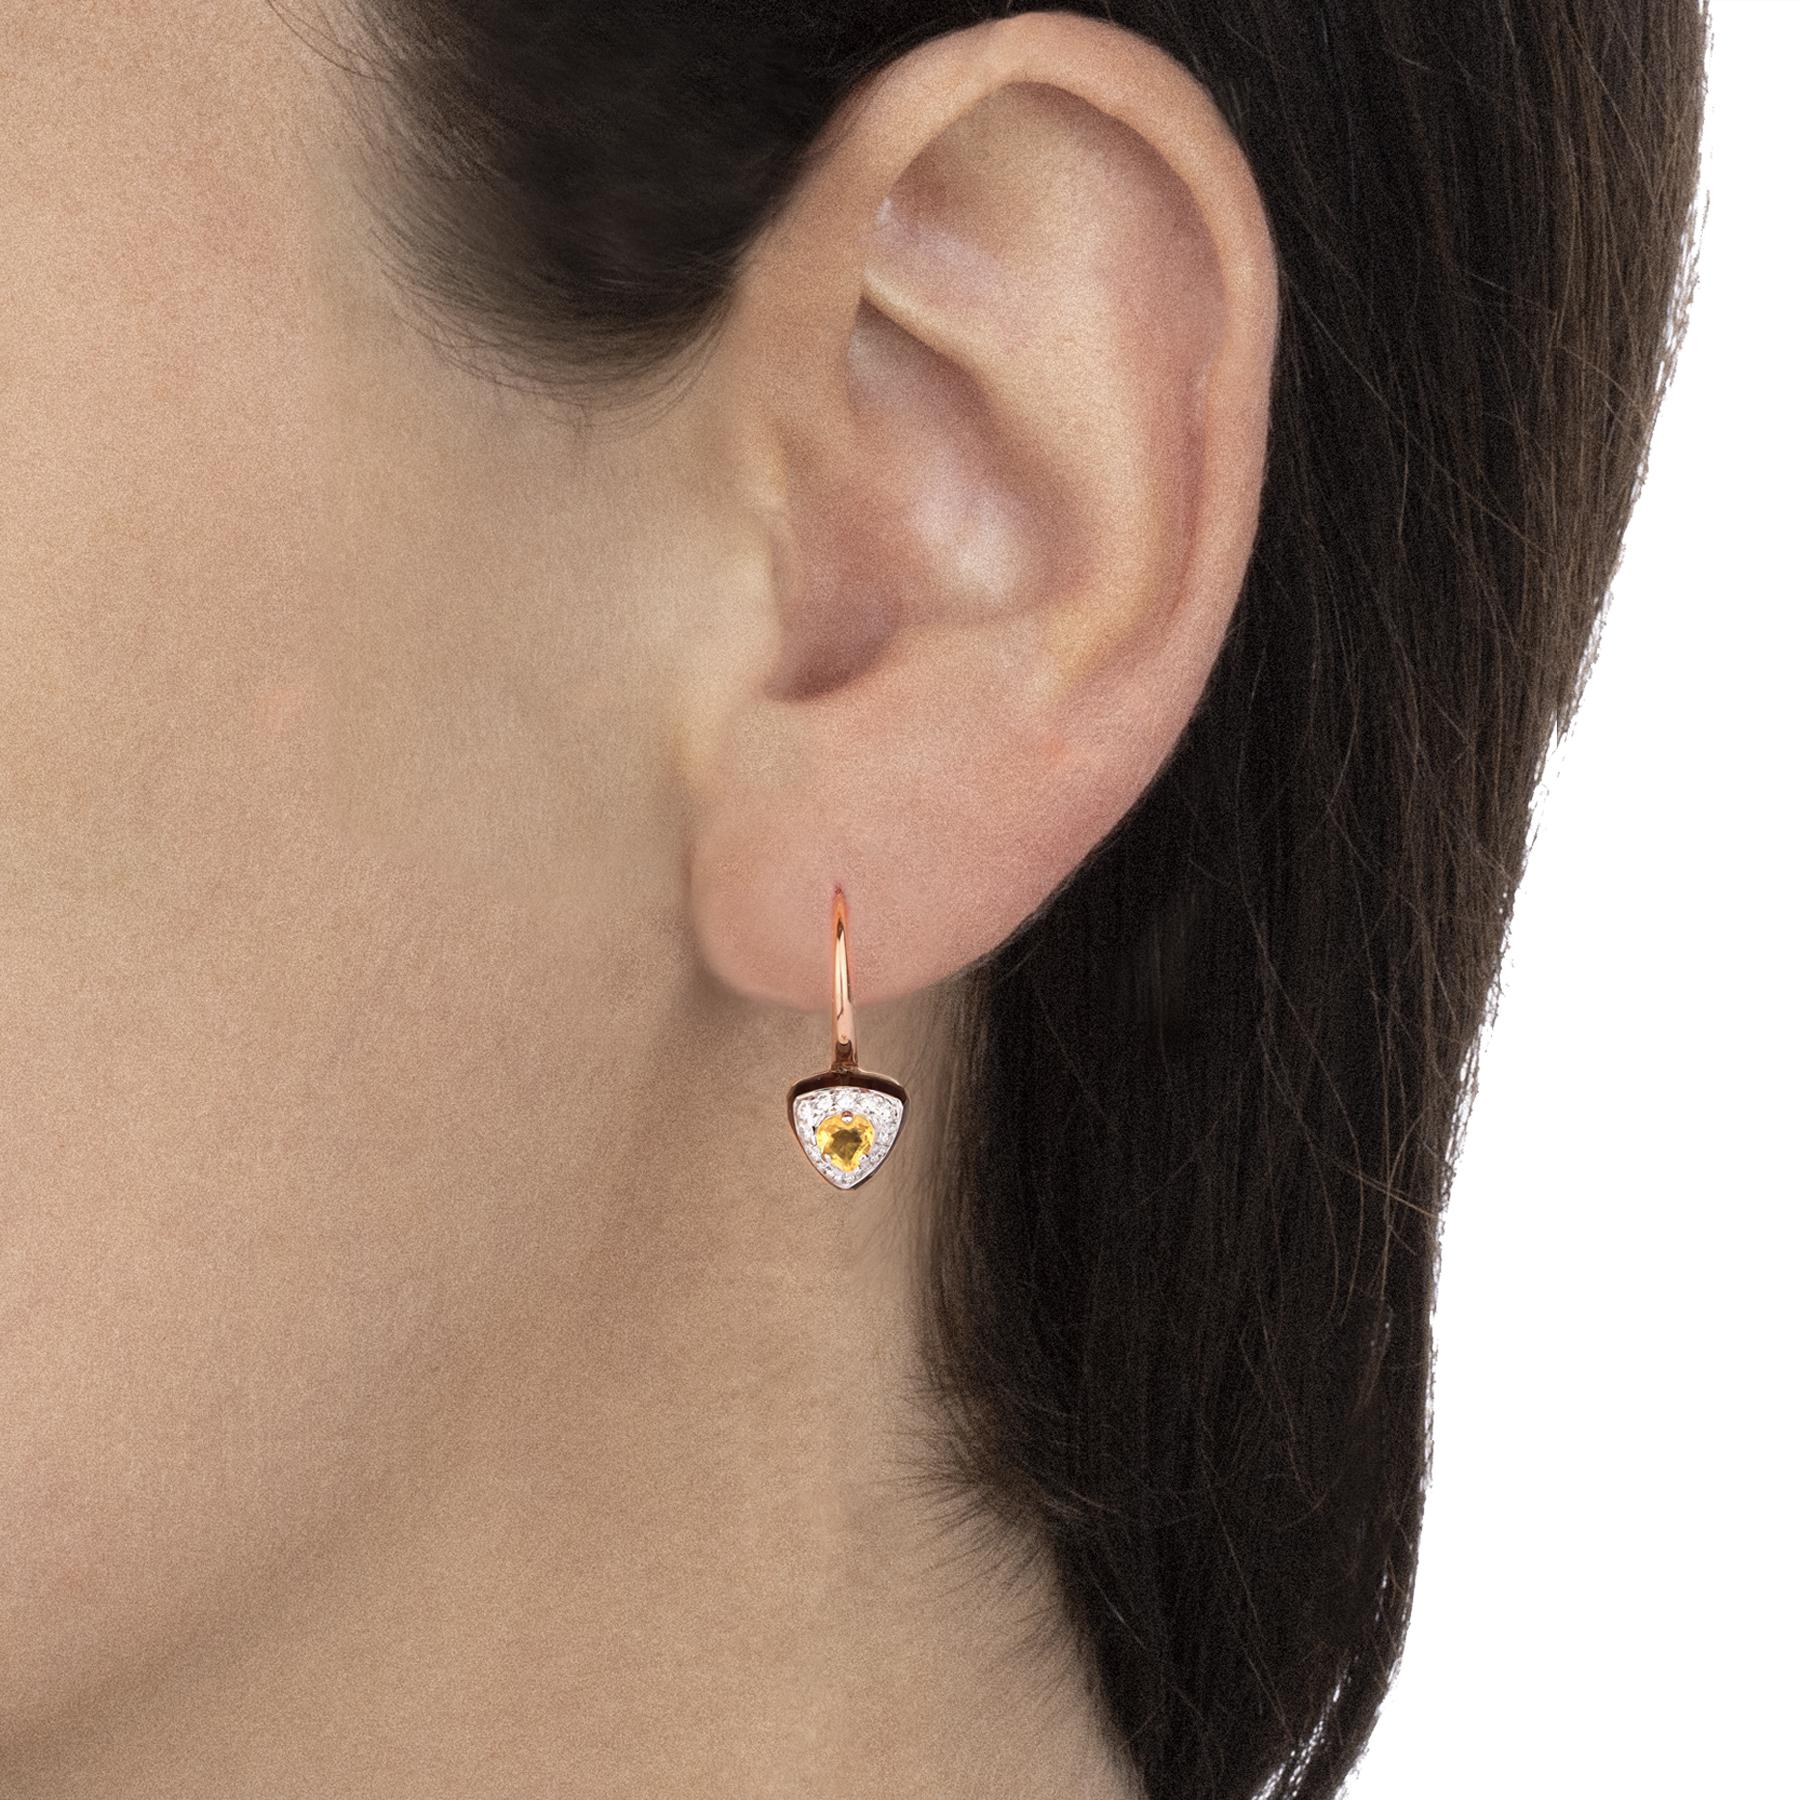 Amber tones for these smoky quartz and citrine earrings. Geometries defined by precious diamonds in a game of shades with a contemporary design.

Cast rose gold earrings, triangle cut smoky quartz 3.90 ct, diamonds pavé of 0.38 ct on white gold and